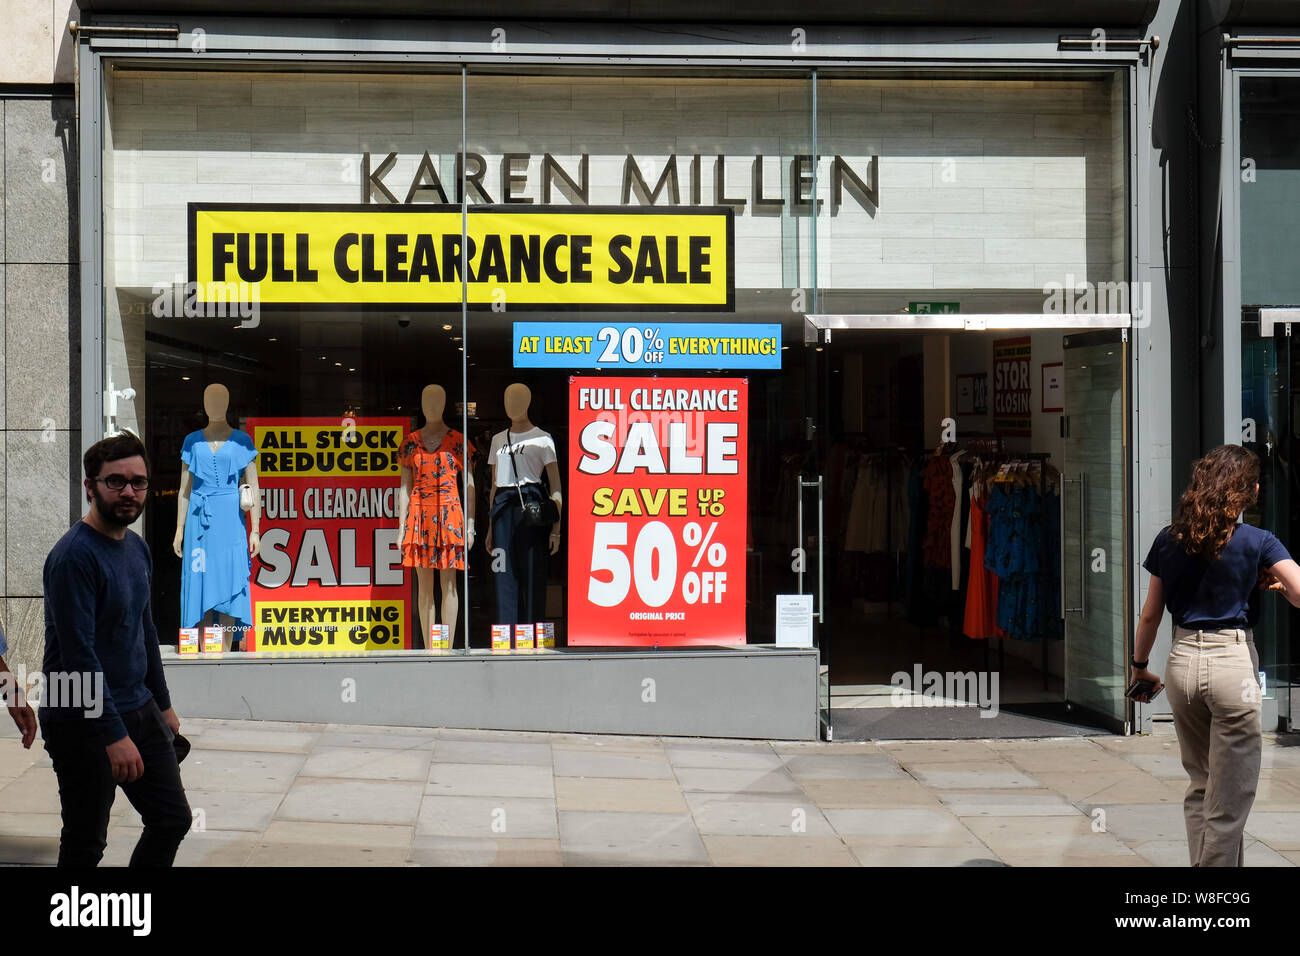 Karen Millen Store High Resolution Stock Photography and Images - Alamy